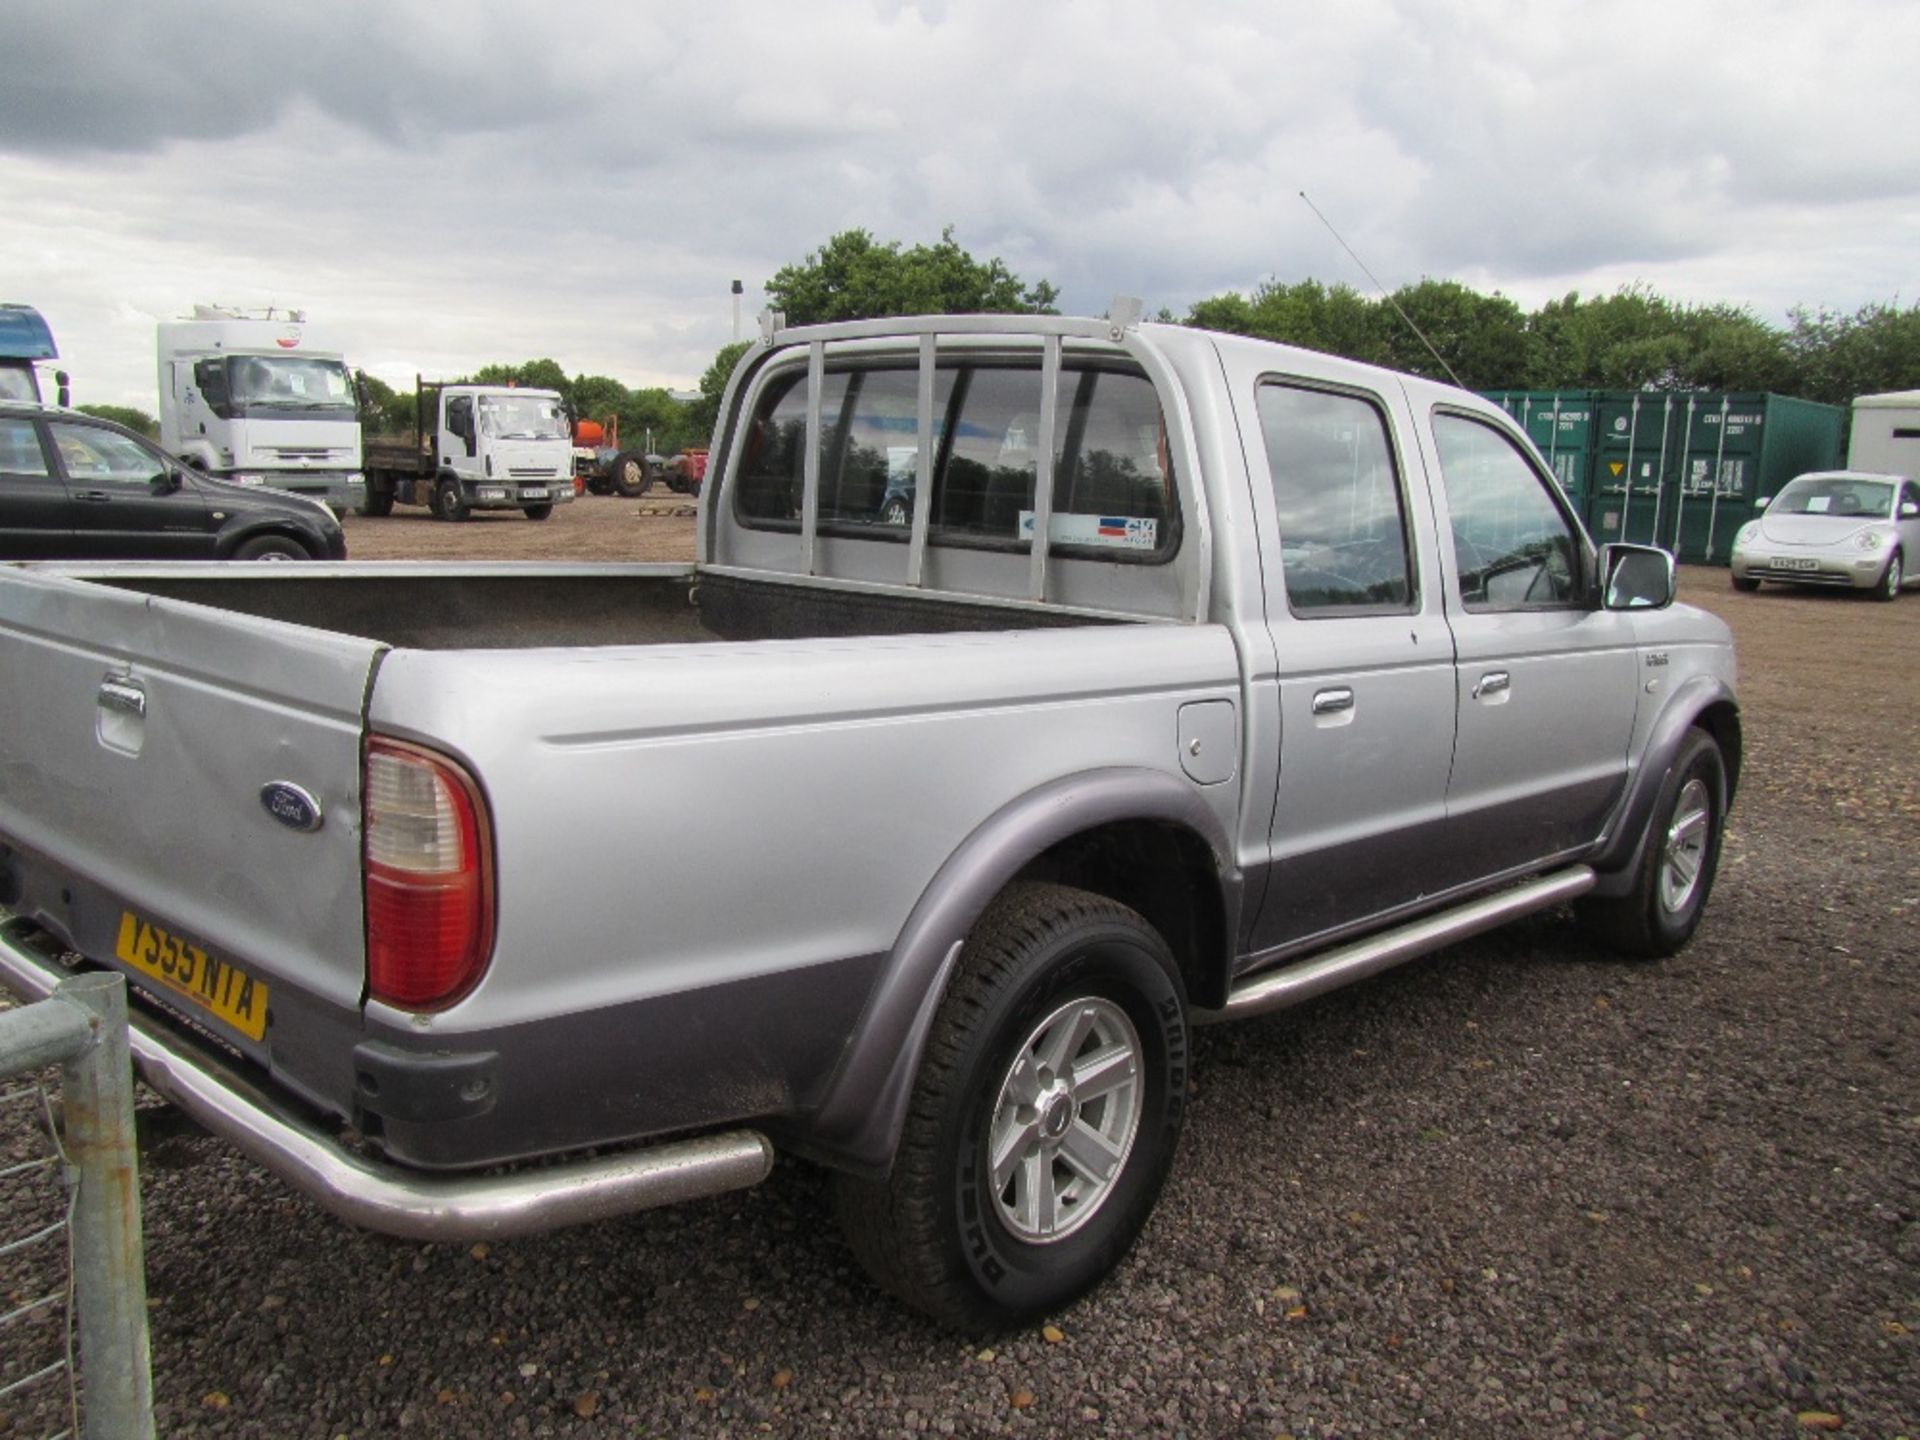 Ford Ranger 2.4 Diesel 5 Speed Manual with Crew Cab, Air Con & Leather Interior. Mileage: 116,000. - Image 5 of 5